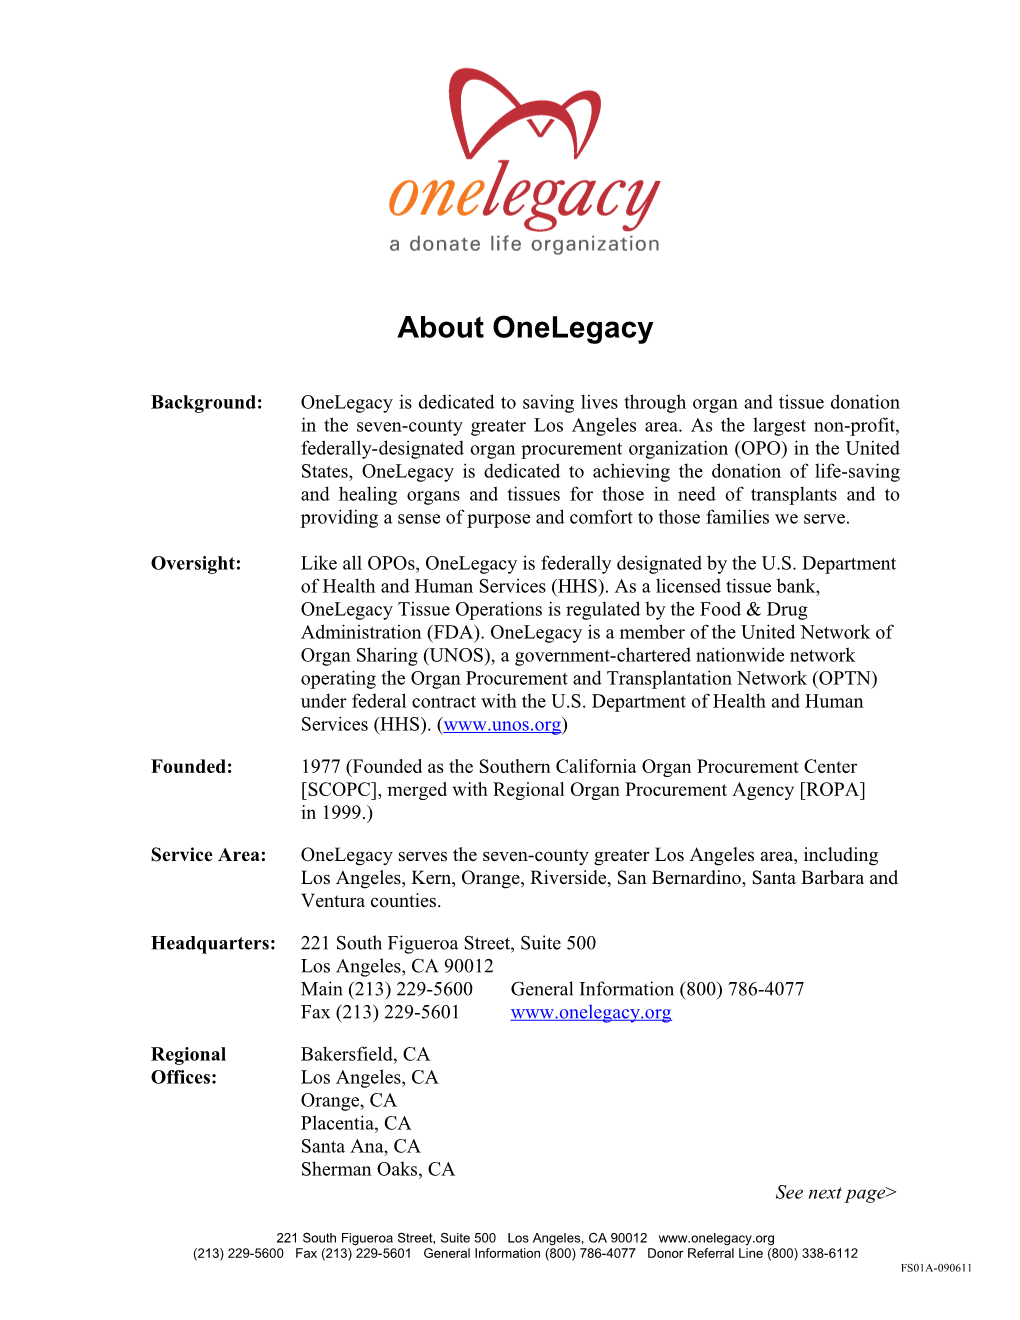 About Onelegacy